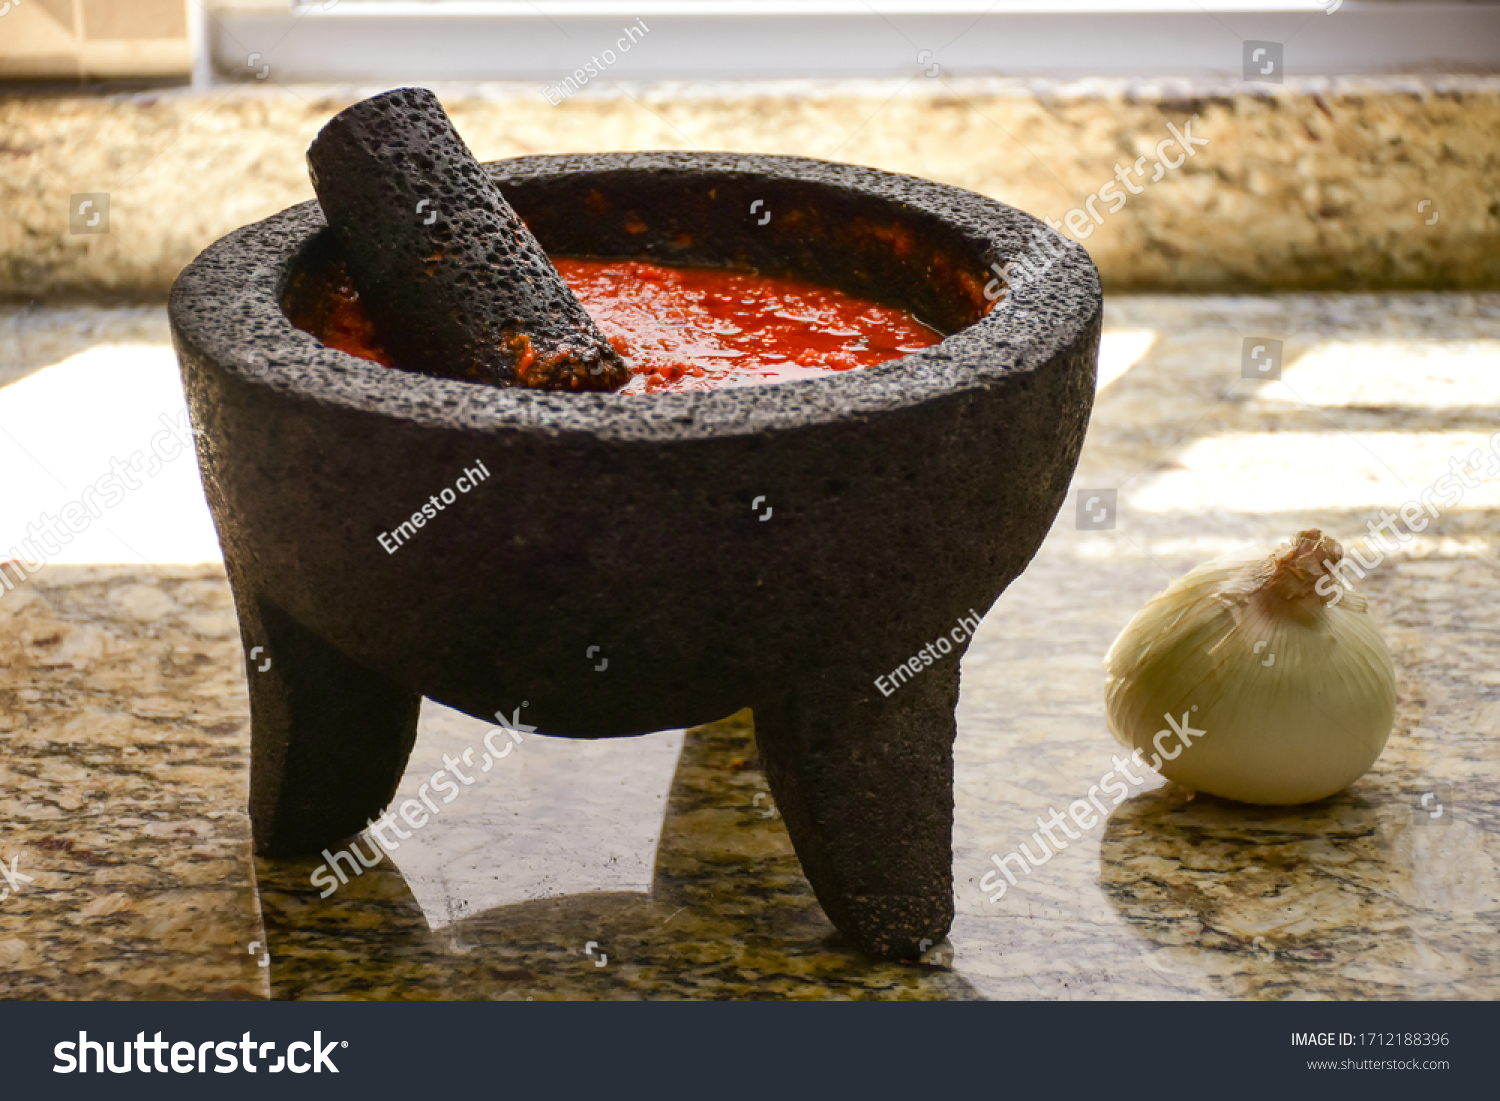 Spicy red sauce made with tomato in a Traditional Mexican molcajete at kitchen #1712188396